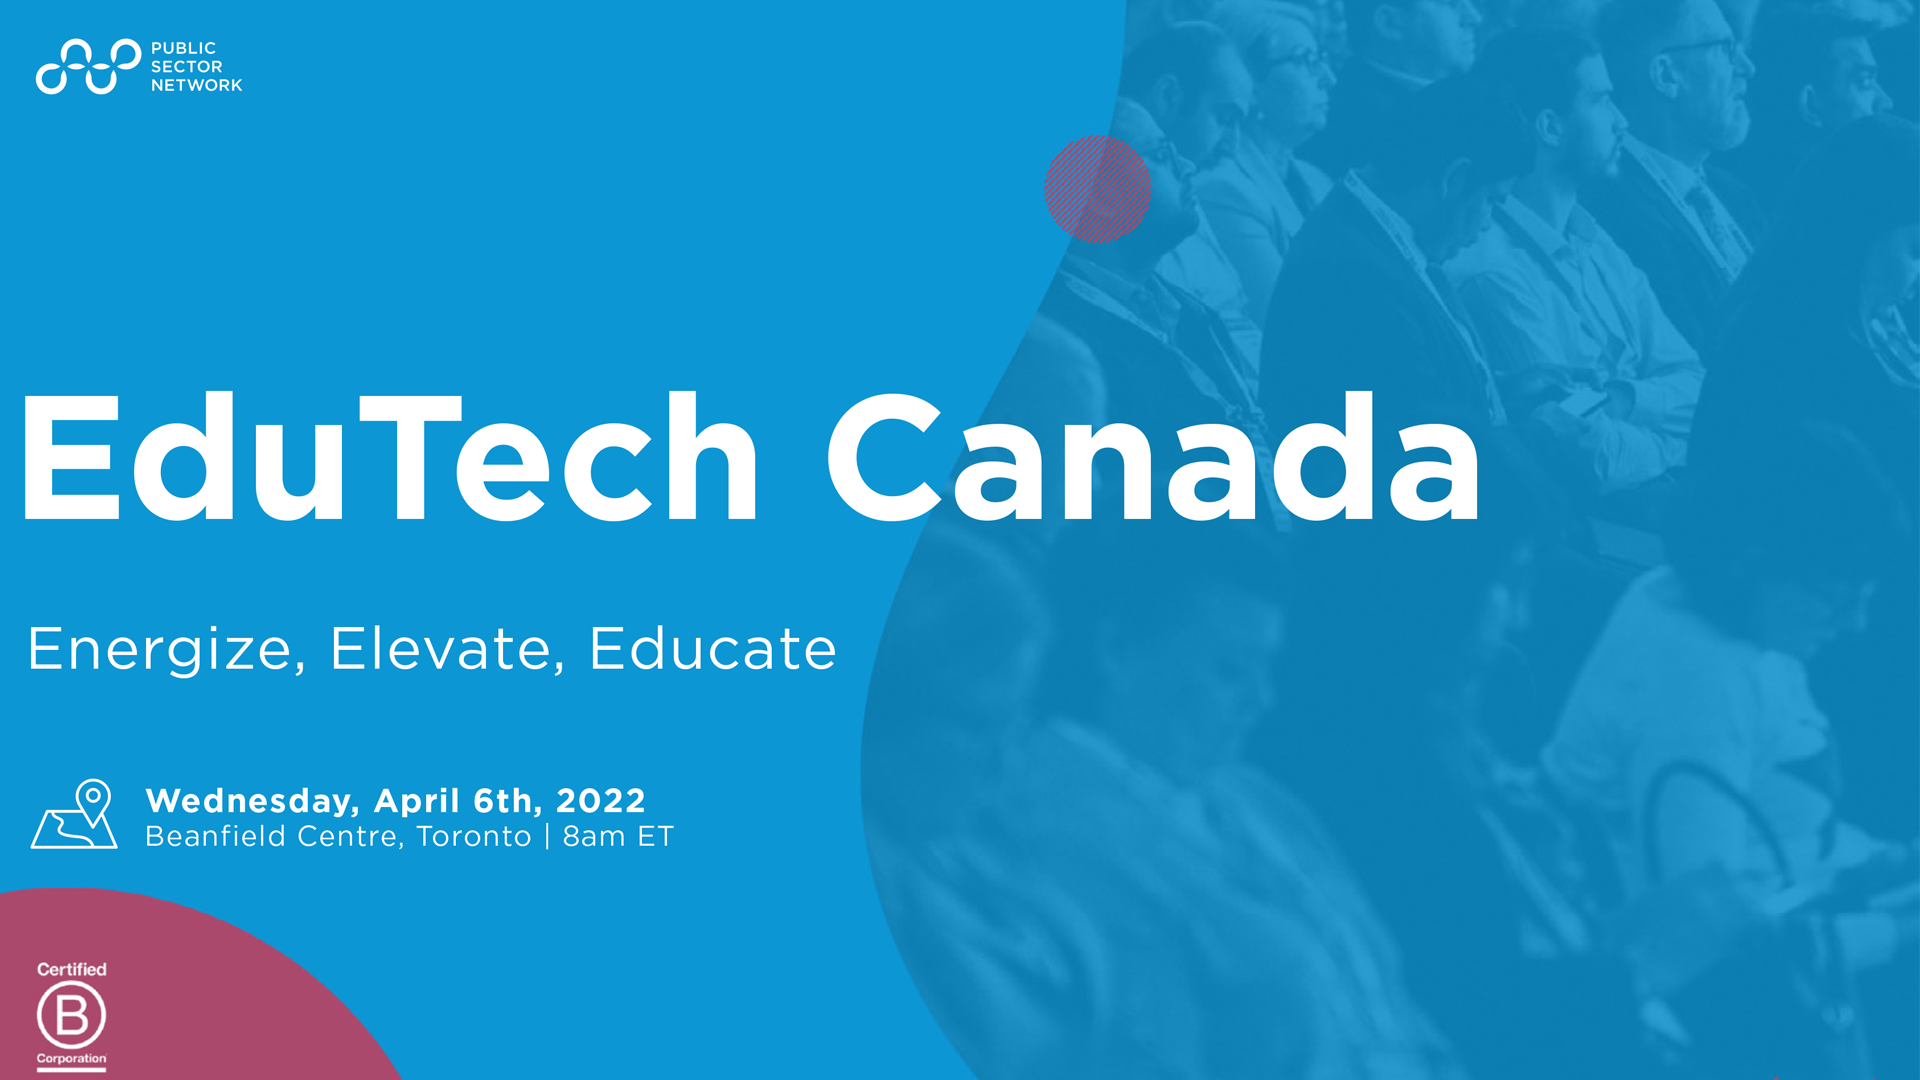 A summary video of last year's EduTech East conference. This event was about education technology in Canada and was hosted in Toronto.